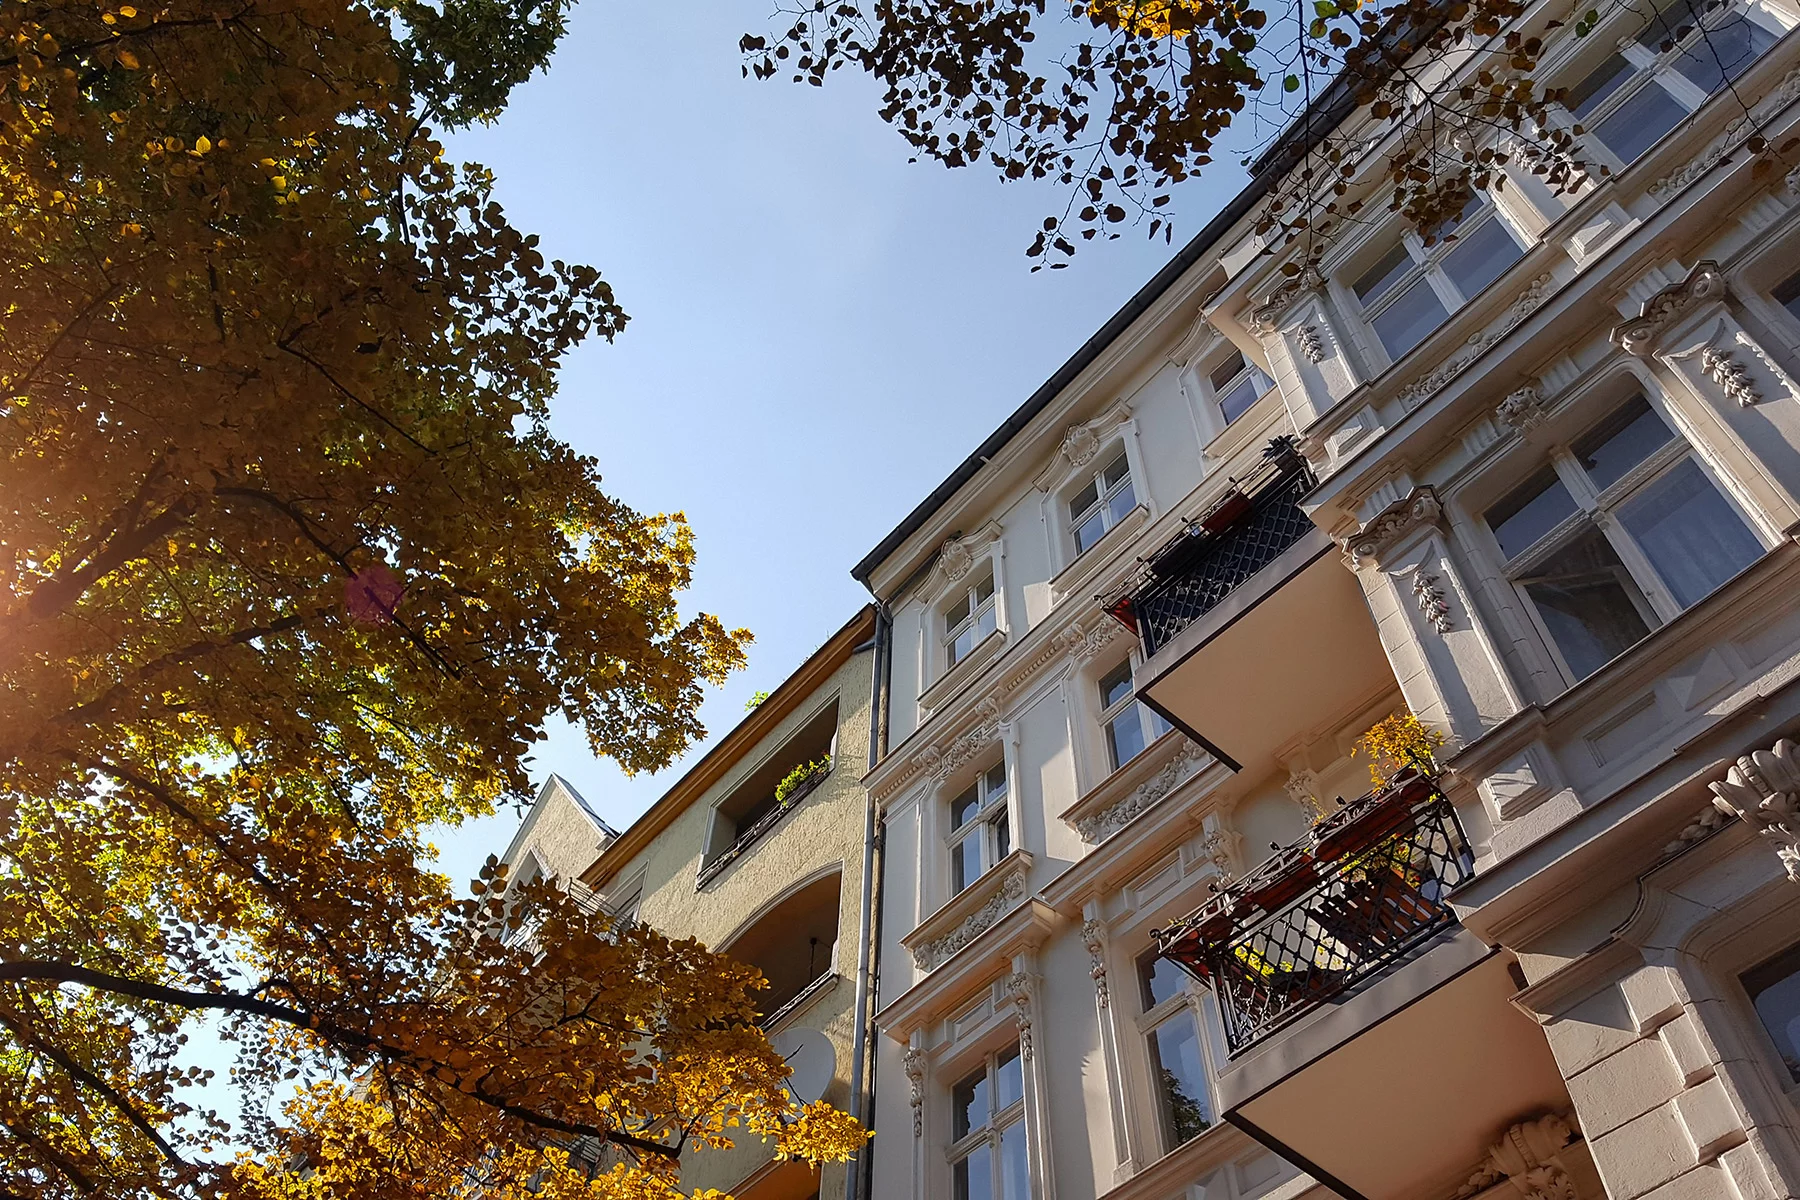 Old-fashioned, intricate apartment exteriors in Kreuzeberg in Berlin